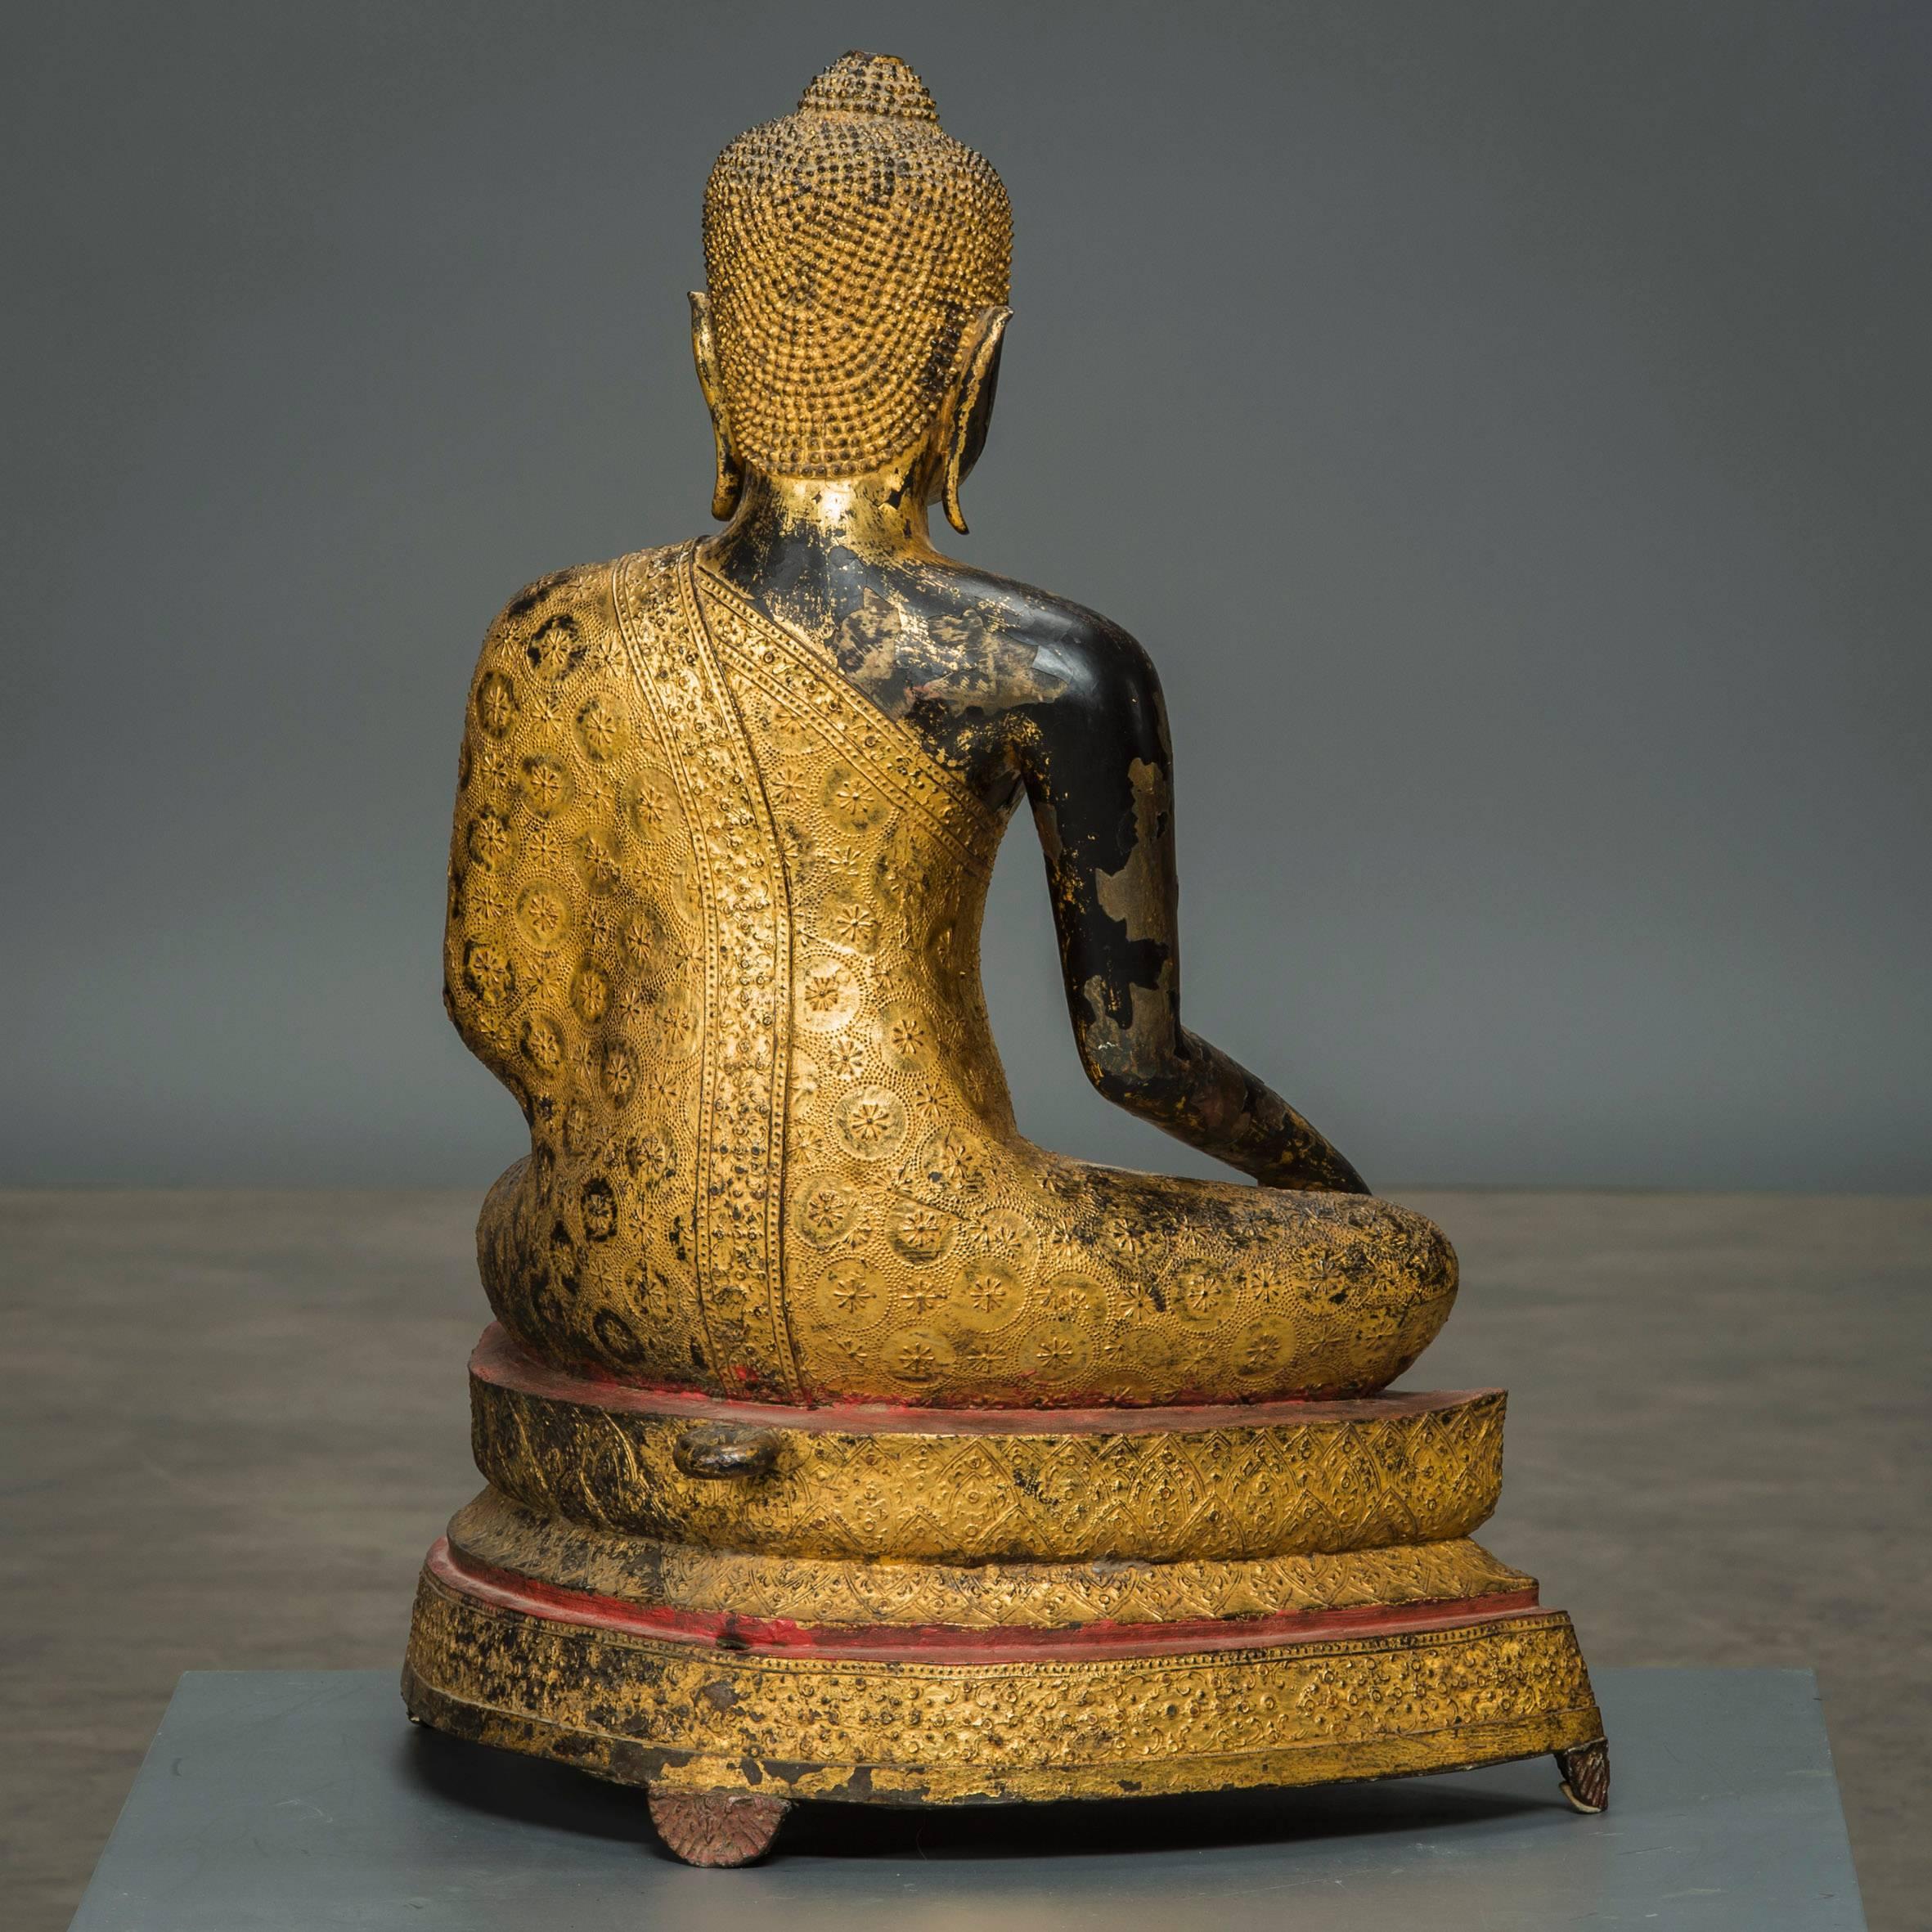 Bronze Buddha from Thailand (formerly Siam), 1800-1830, with original gilding, partially worn to black lacquer. Originally completely gilded with red lacquer edges.

The bronze imposed black lacquer, in order to get the gilding to stick. The wear